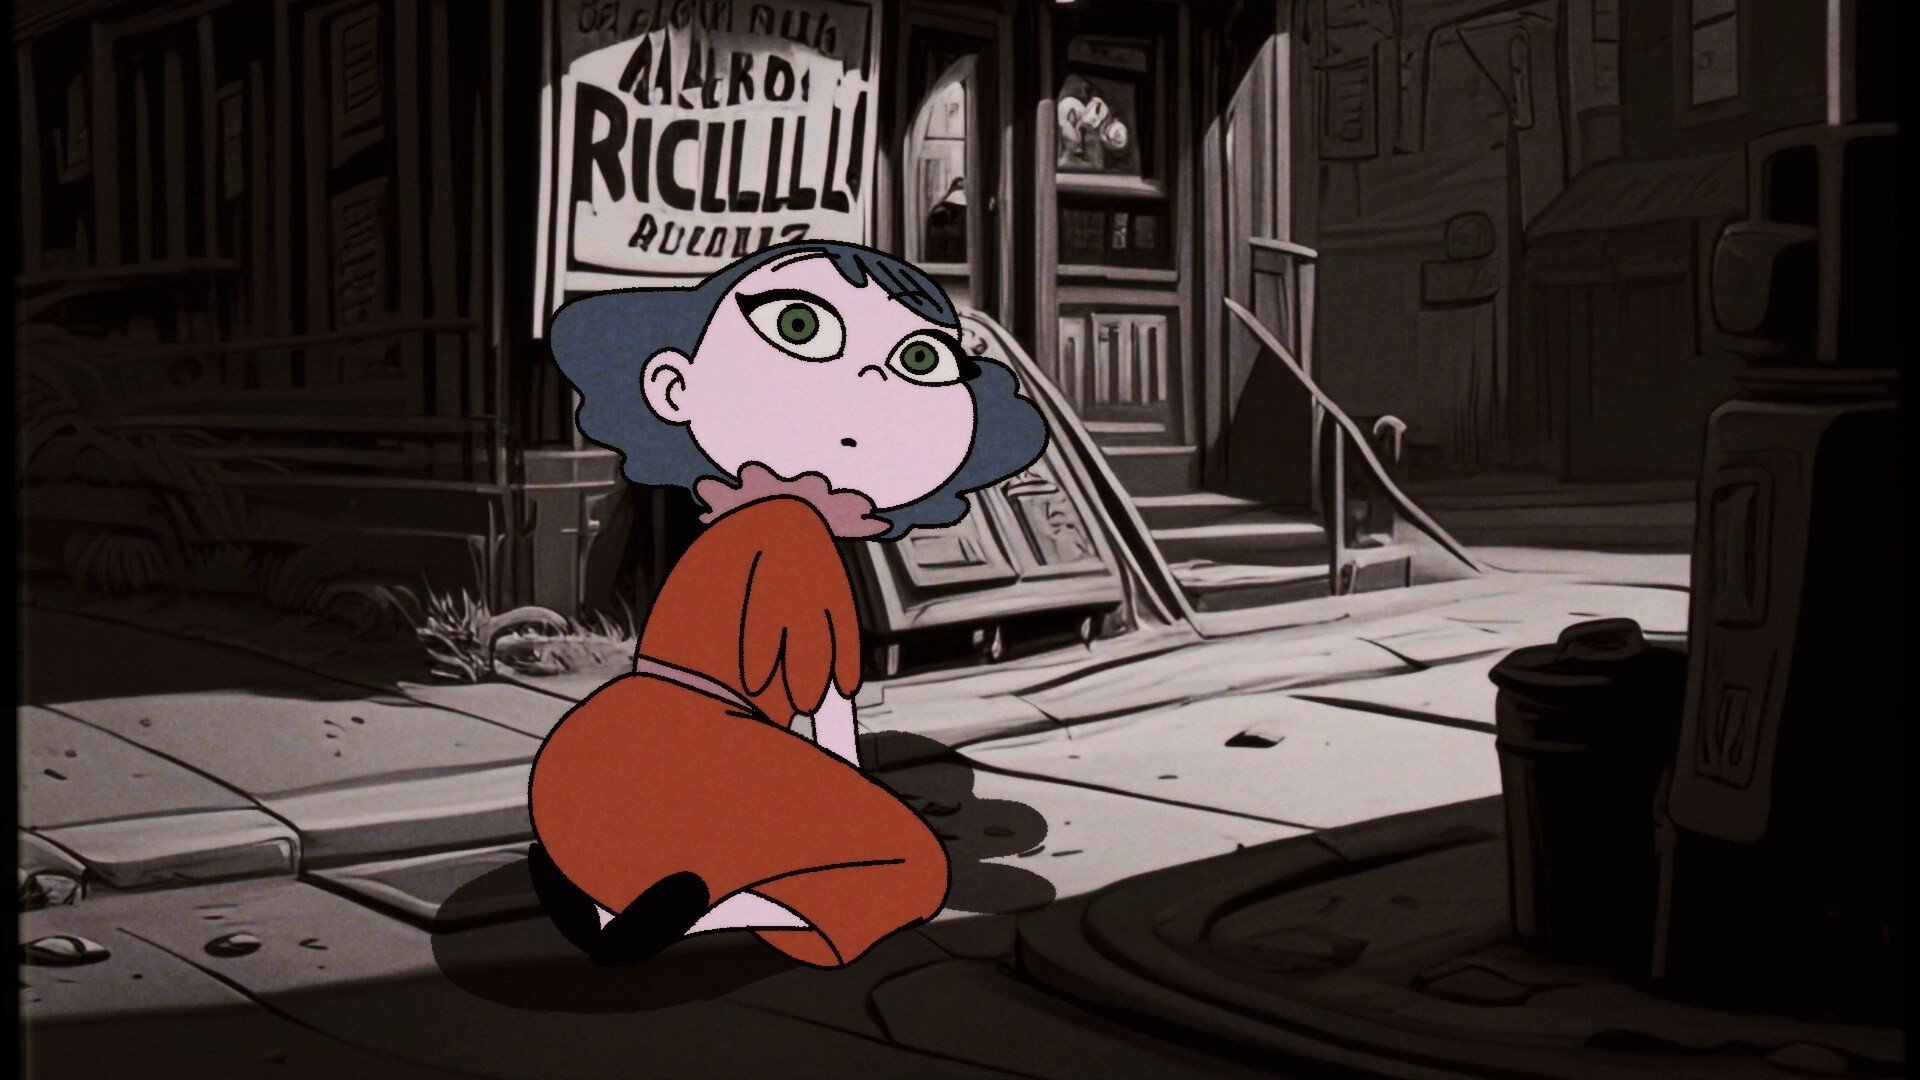 An animation of a woman in a red dress squatting on the ground. In the background you can see a dark, deserted alley.